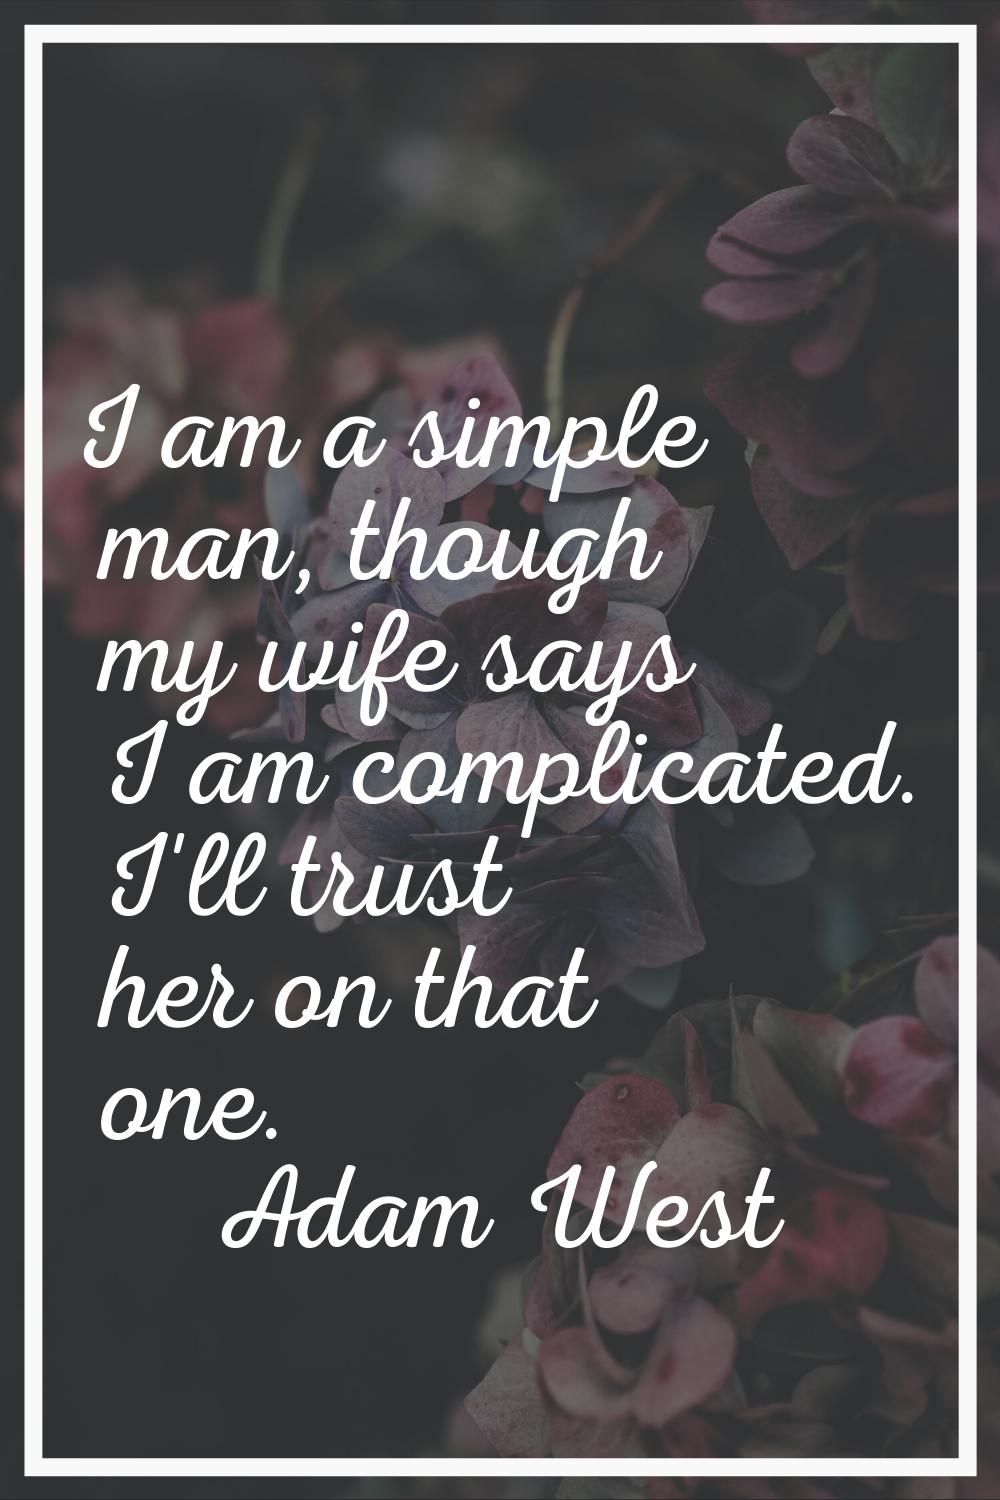 I am a simple man, though my wife says I am complicated. I'll trust her on that one.